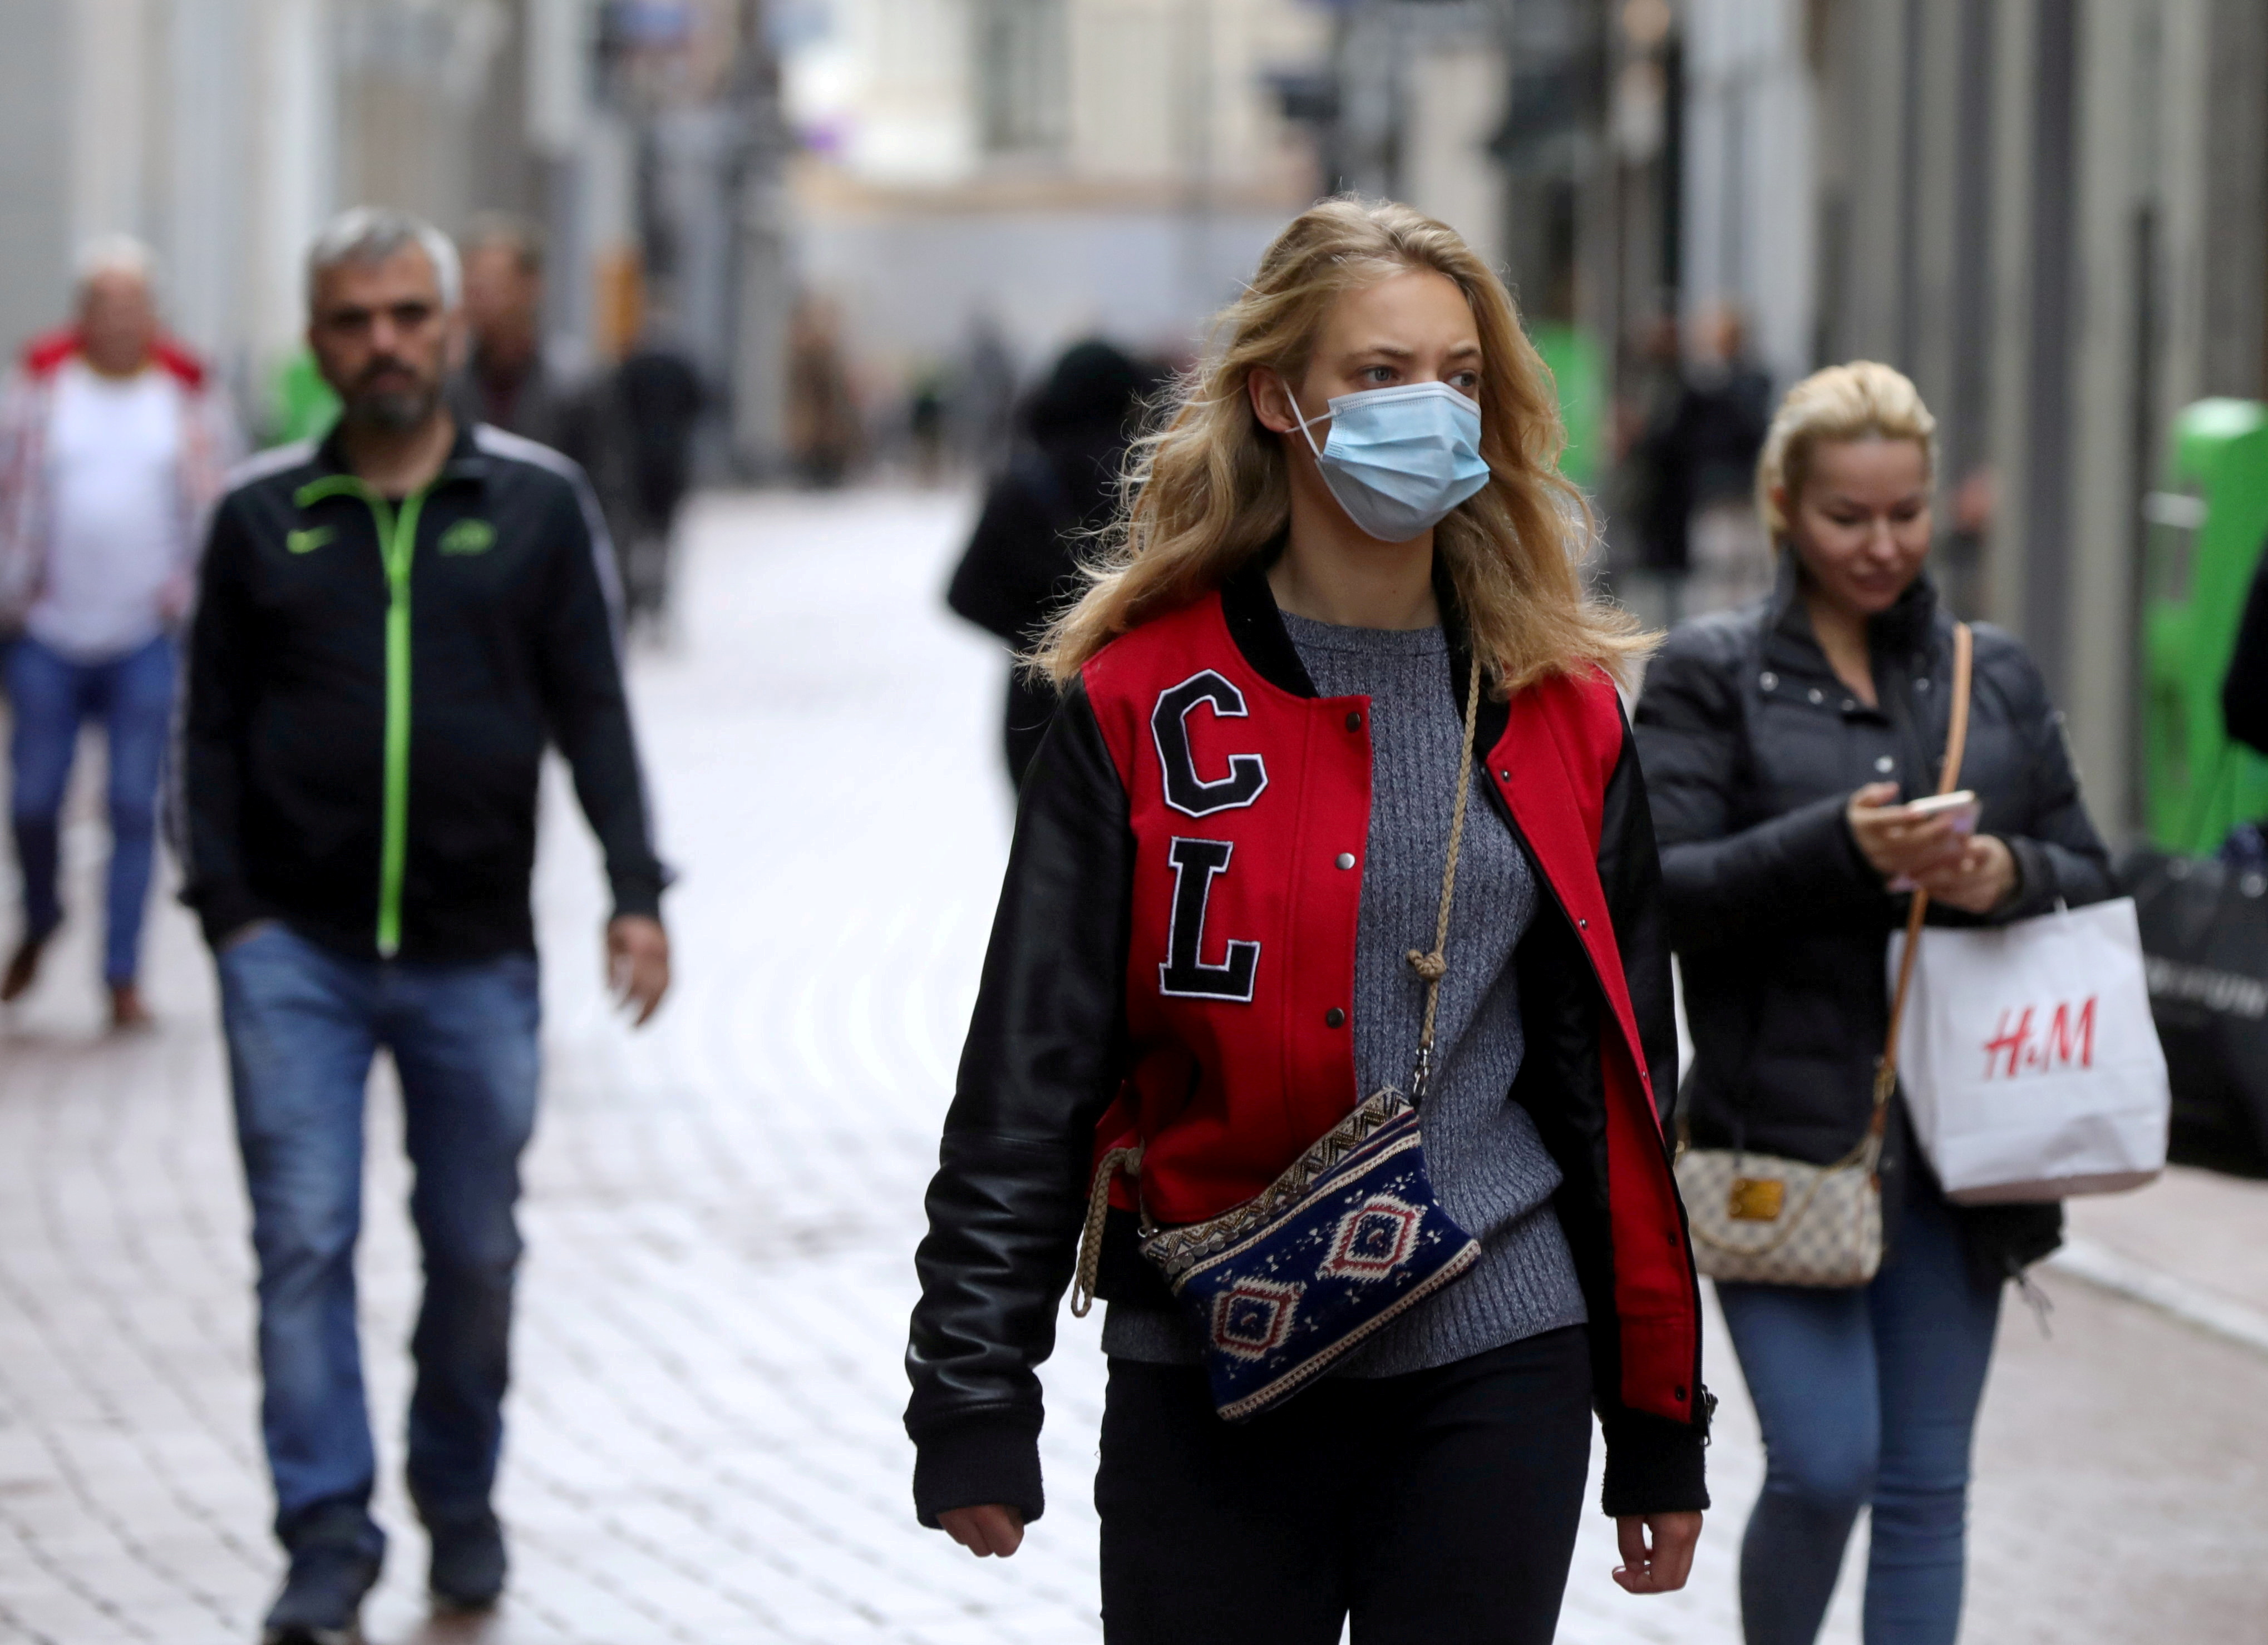 People walk on a street while shopping amid a renewed spread of the coronavirus disease in Amsterdam, Netherlands October 7, 2020. REUTERS/Eva Plevier